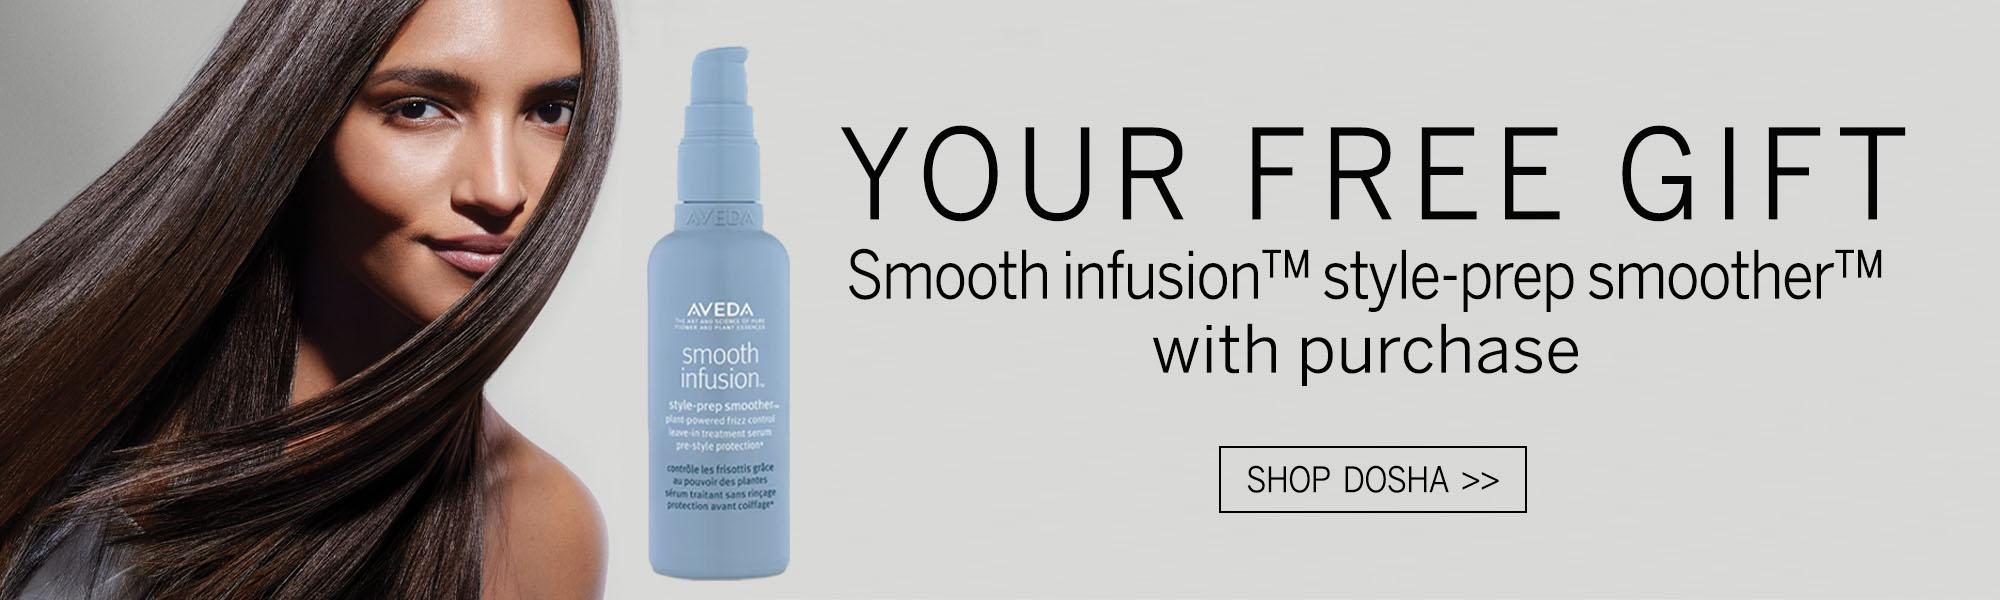 Your Free Gift with a $75 product purchase, Smooth infusion™ style-pre smoother™